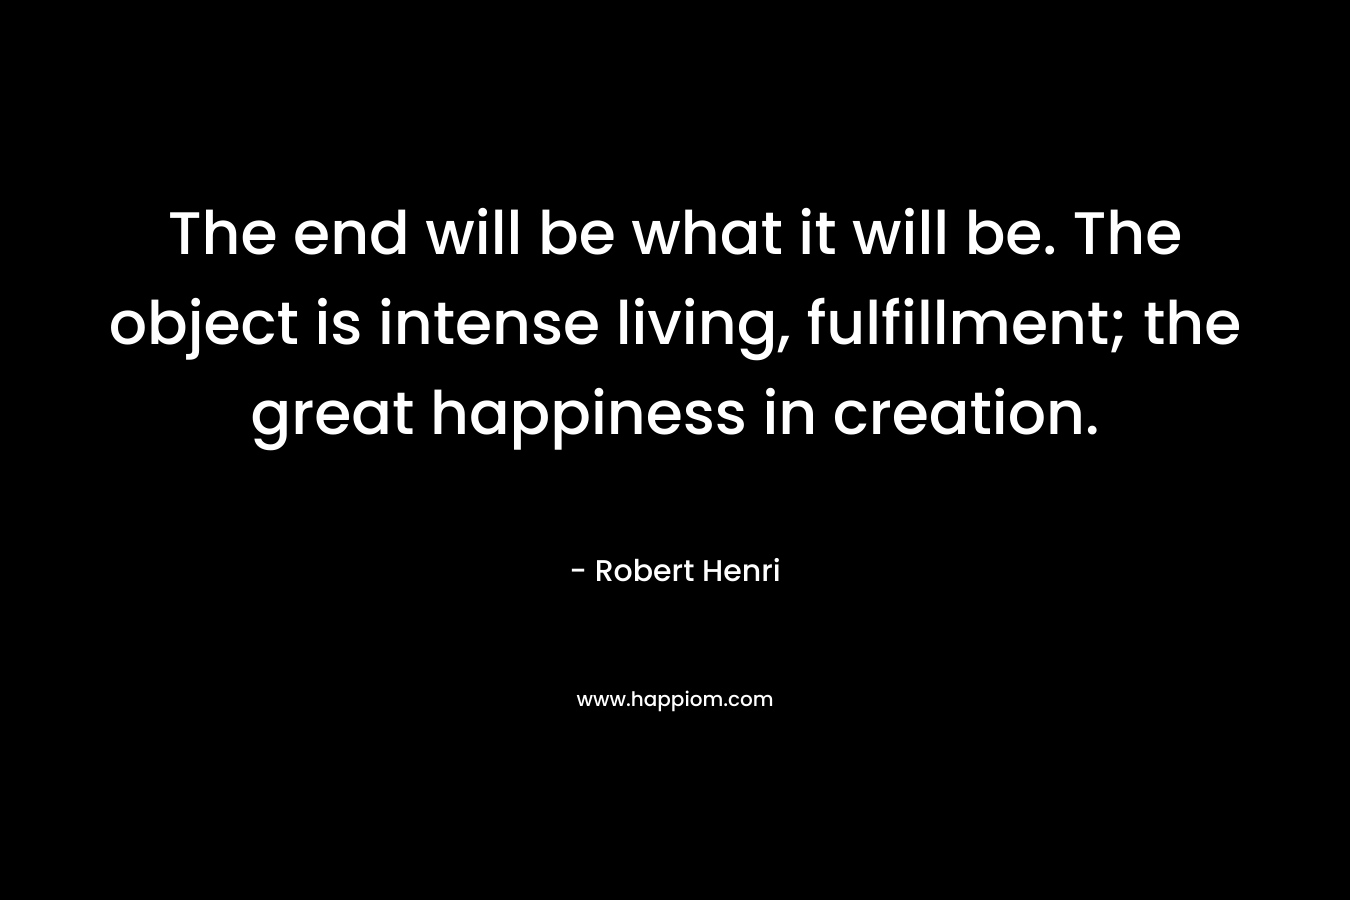 The end will be what it will be. The object is intense living, fulfillment; the great happiness in creation. – Robert Henri